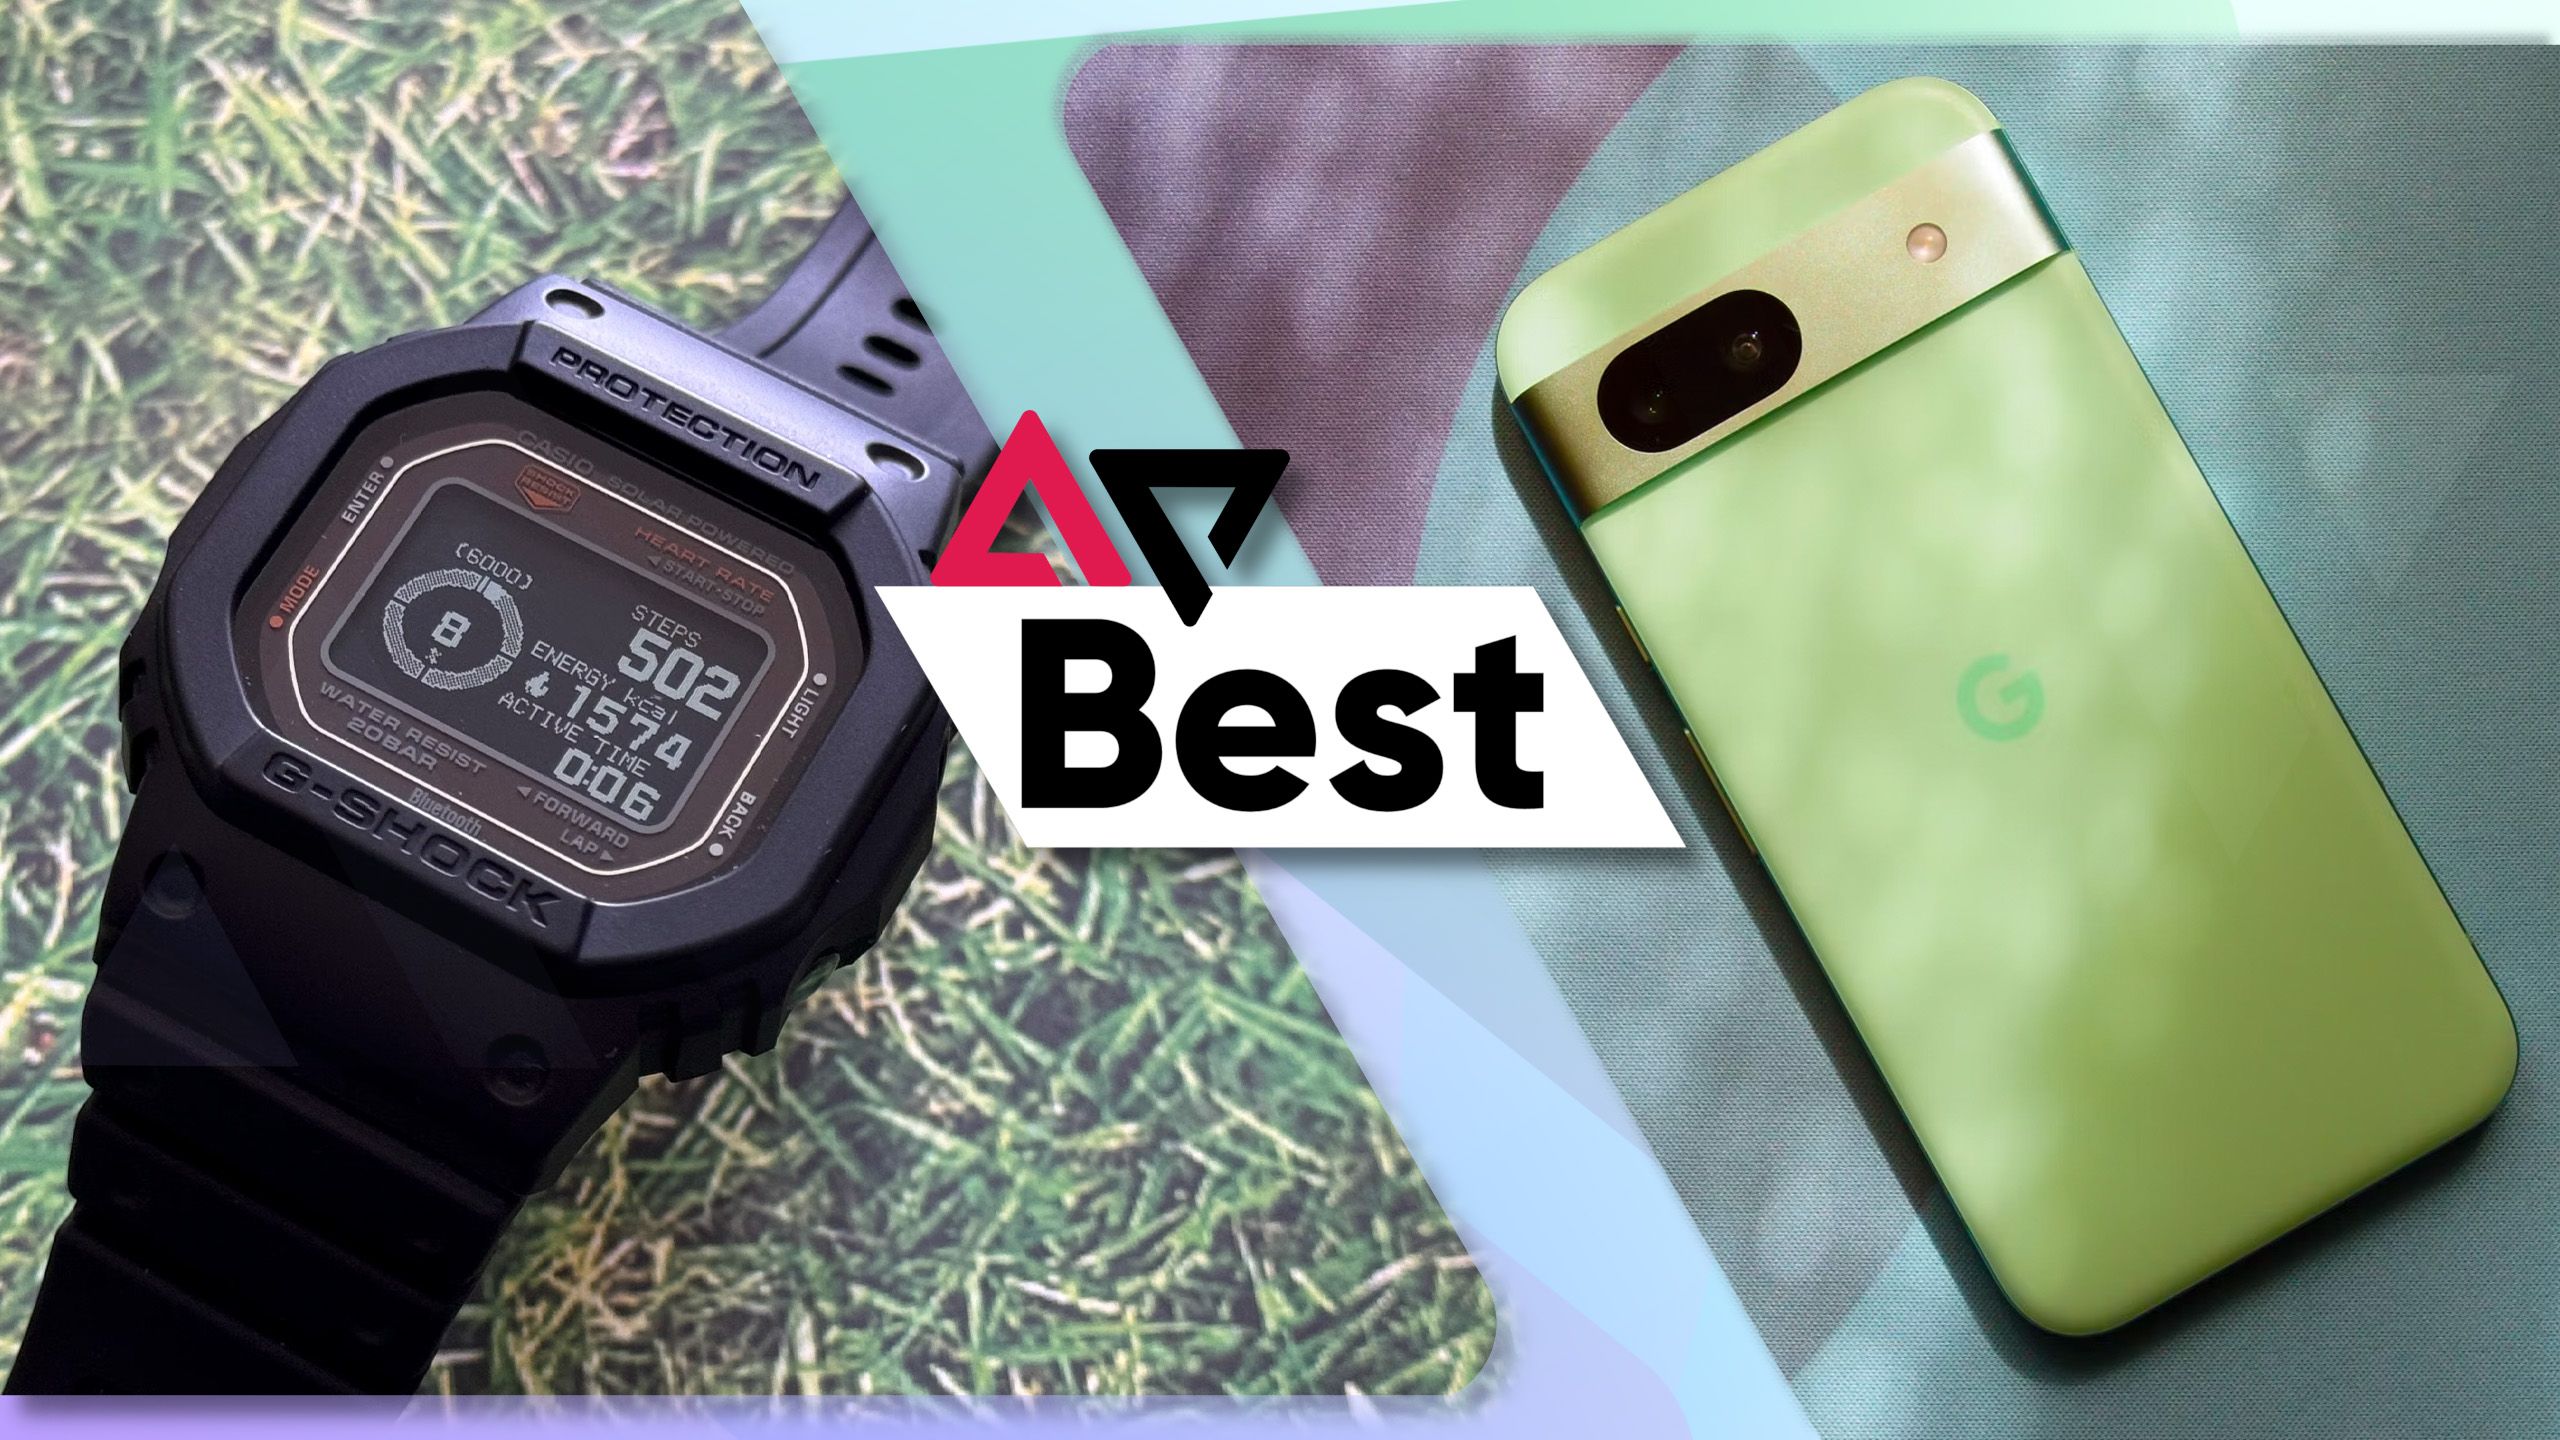 Best gadgets reviewed in May